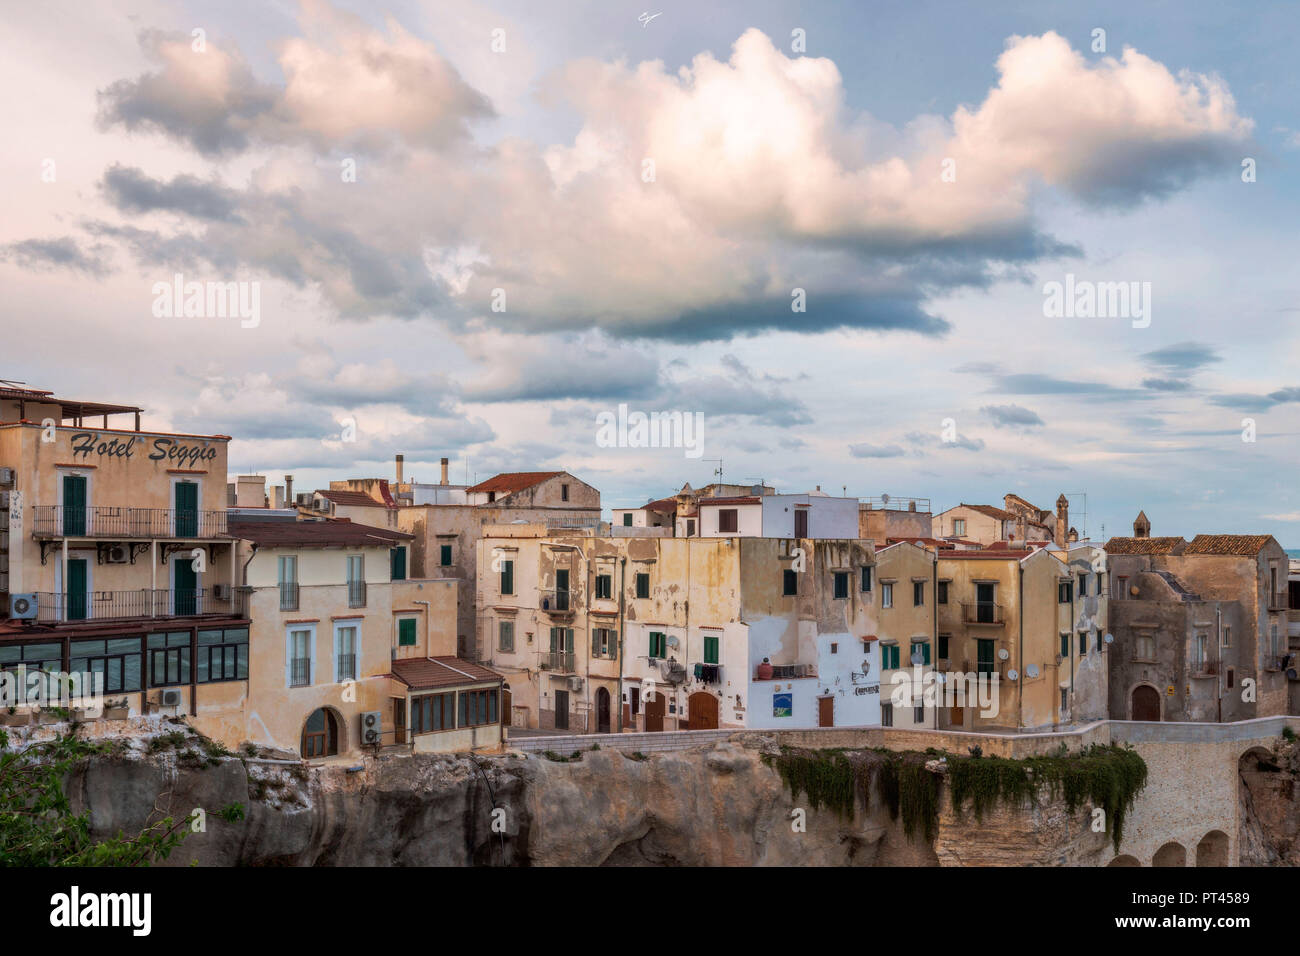 The typical buildings of the old town, Vieste, Foggia province, Gargano, Apulia Italy, Europe Stock Photo